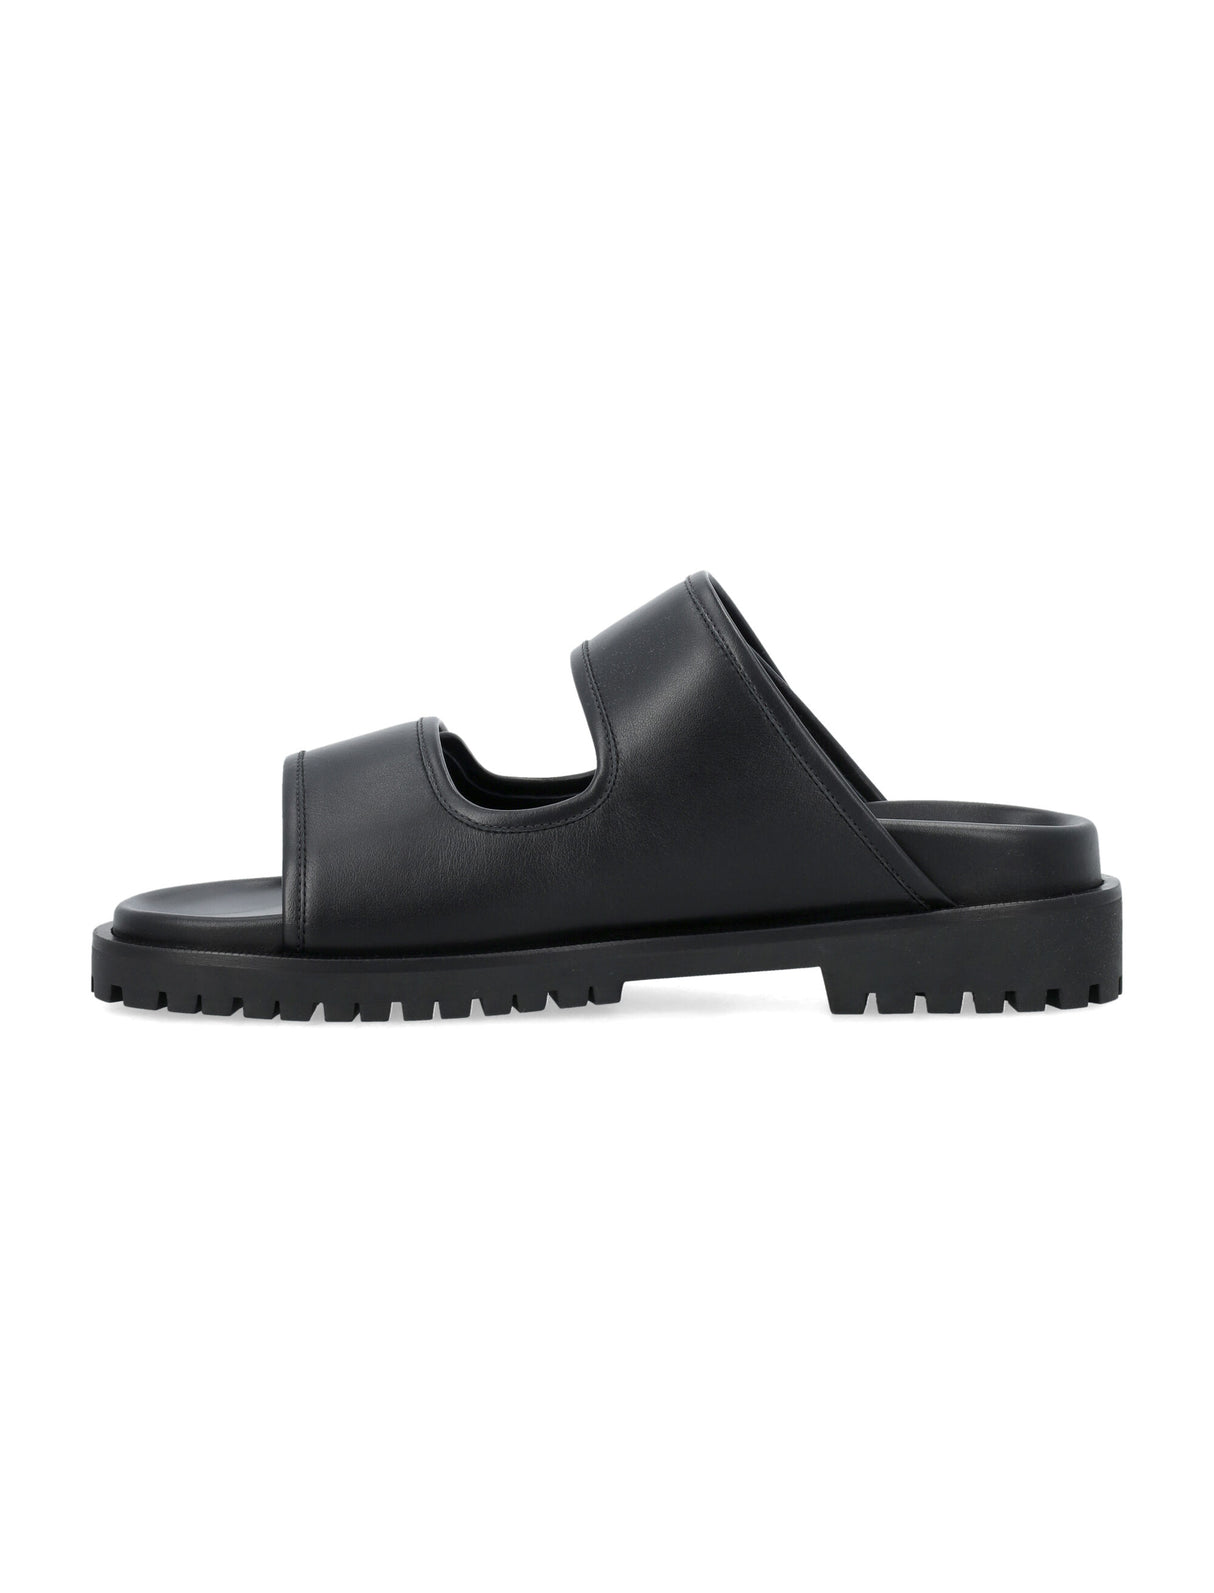 OFF-WHITE Leather Metal Arrow Sandal for Men - SS24